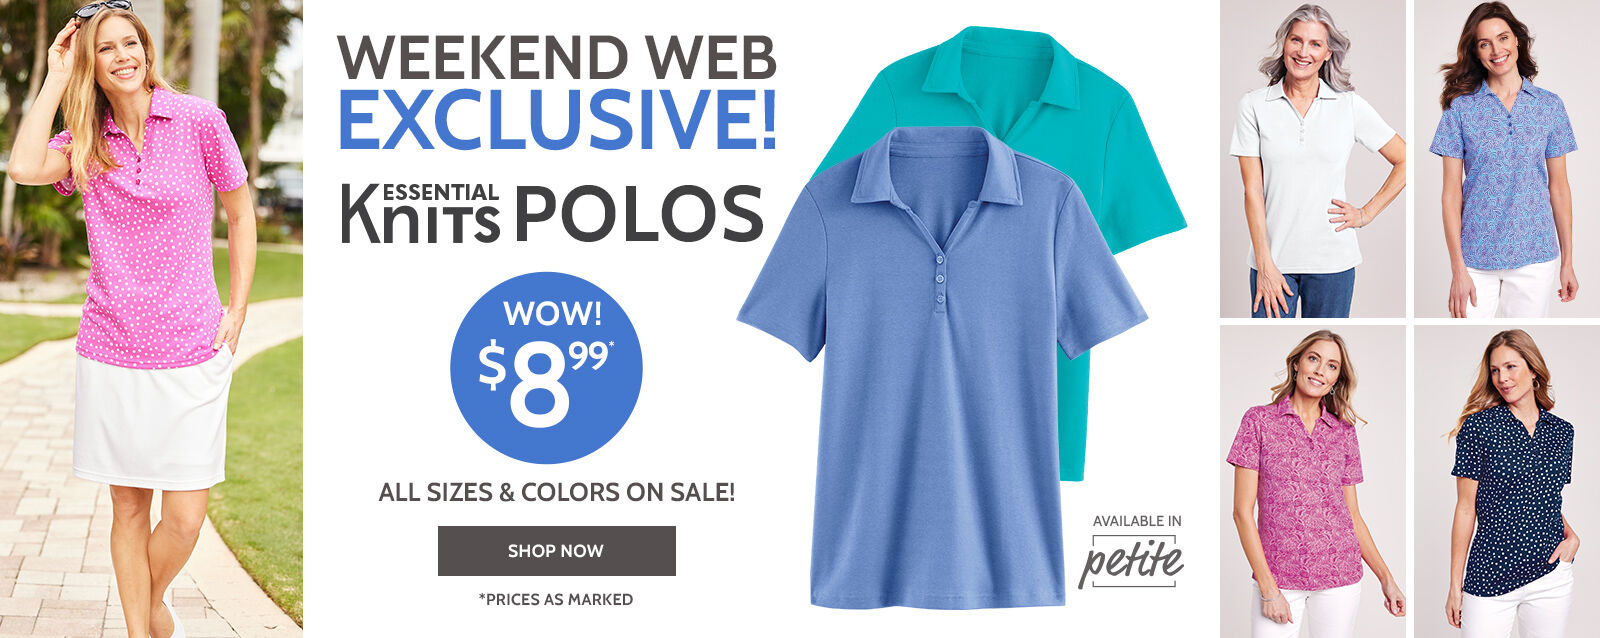 wekend web exclusive! essential knit polos wow! $8.99* all sizes & all colors on sale! shop now *prices as marked available in petite